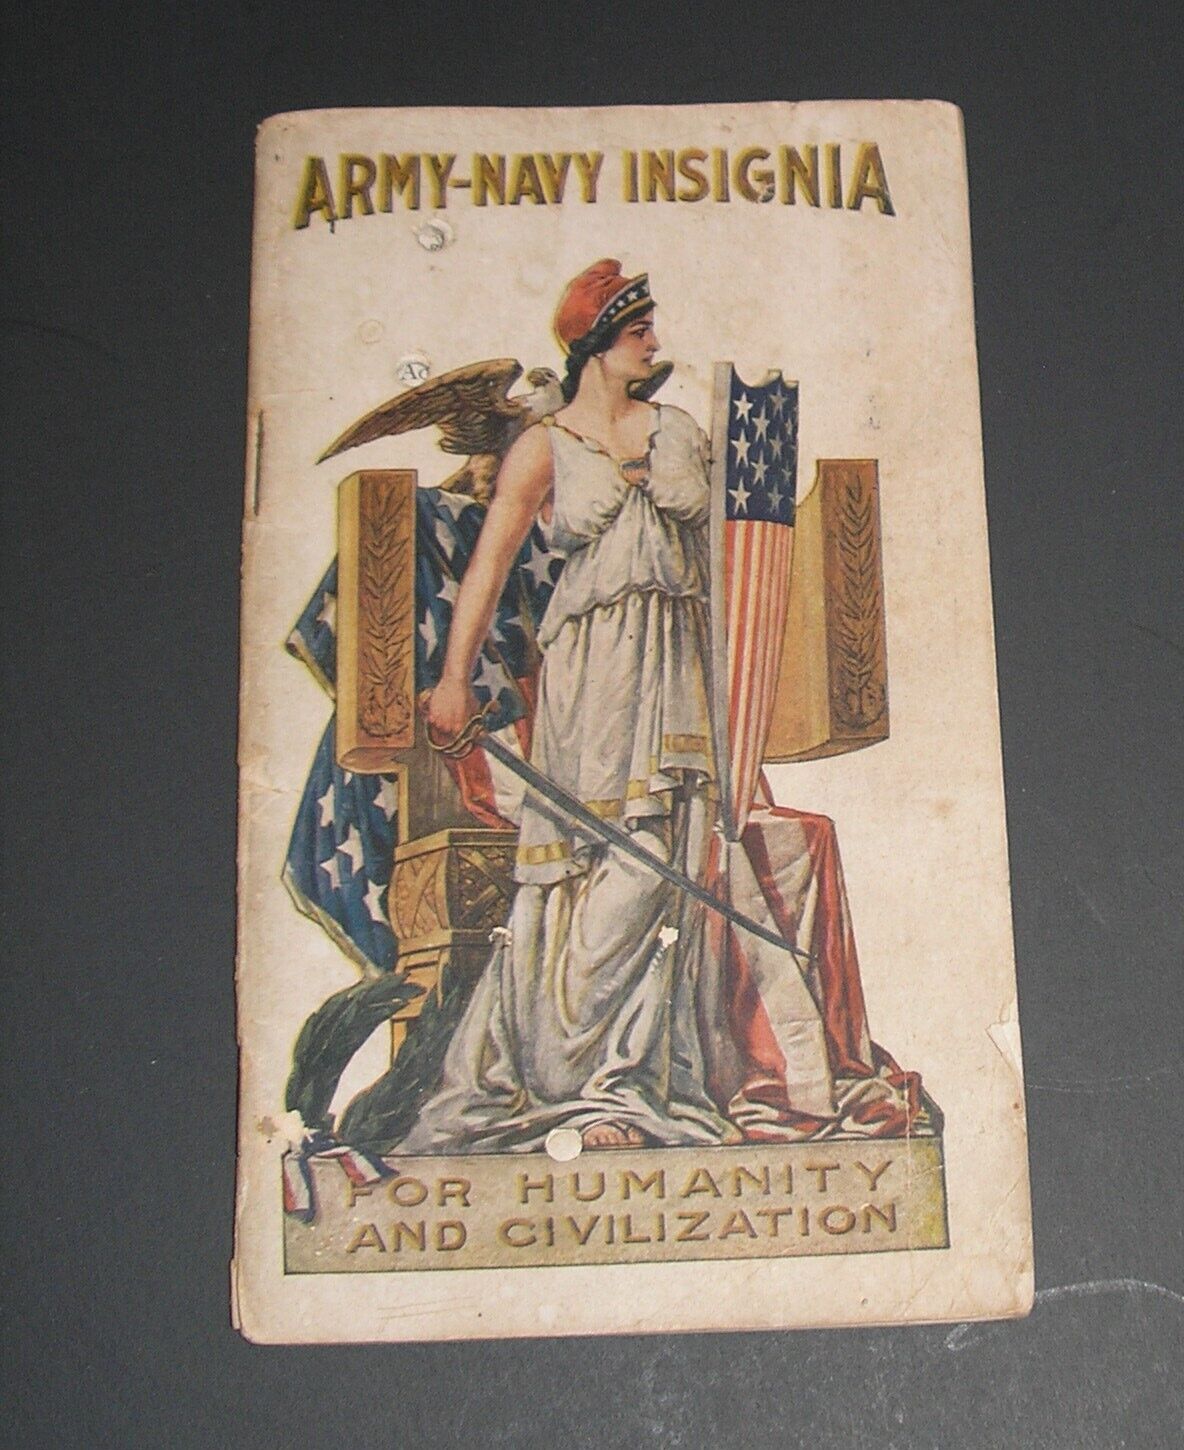 Original 1918 WWI Era Booklet   INSIGNIA OF THE ARMY- NAVY